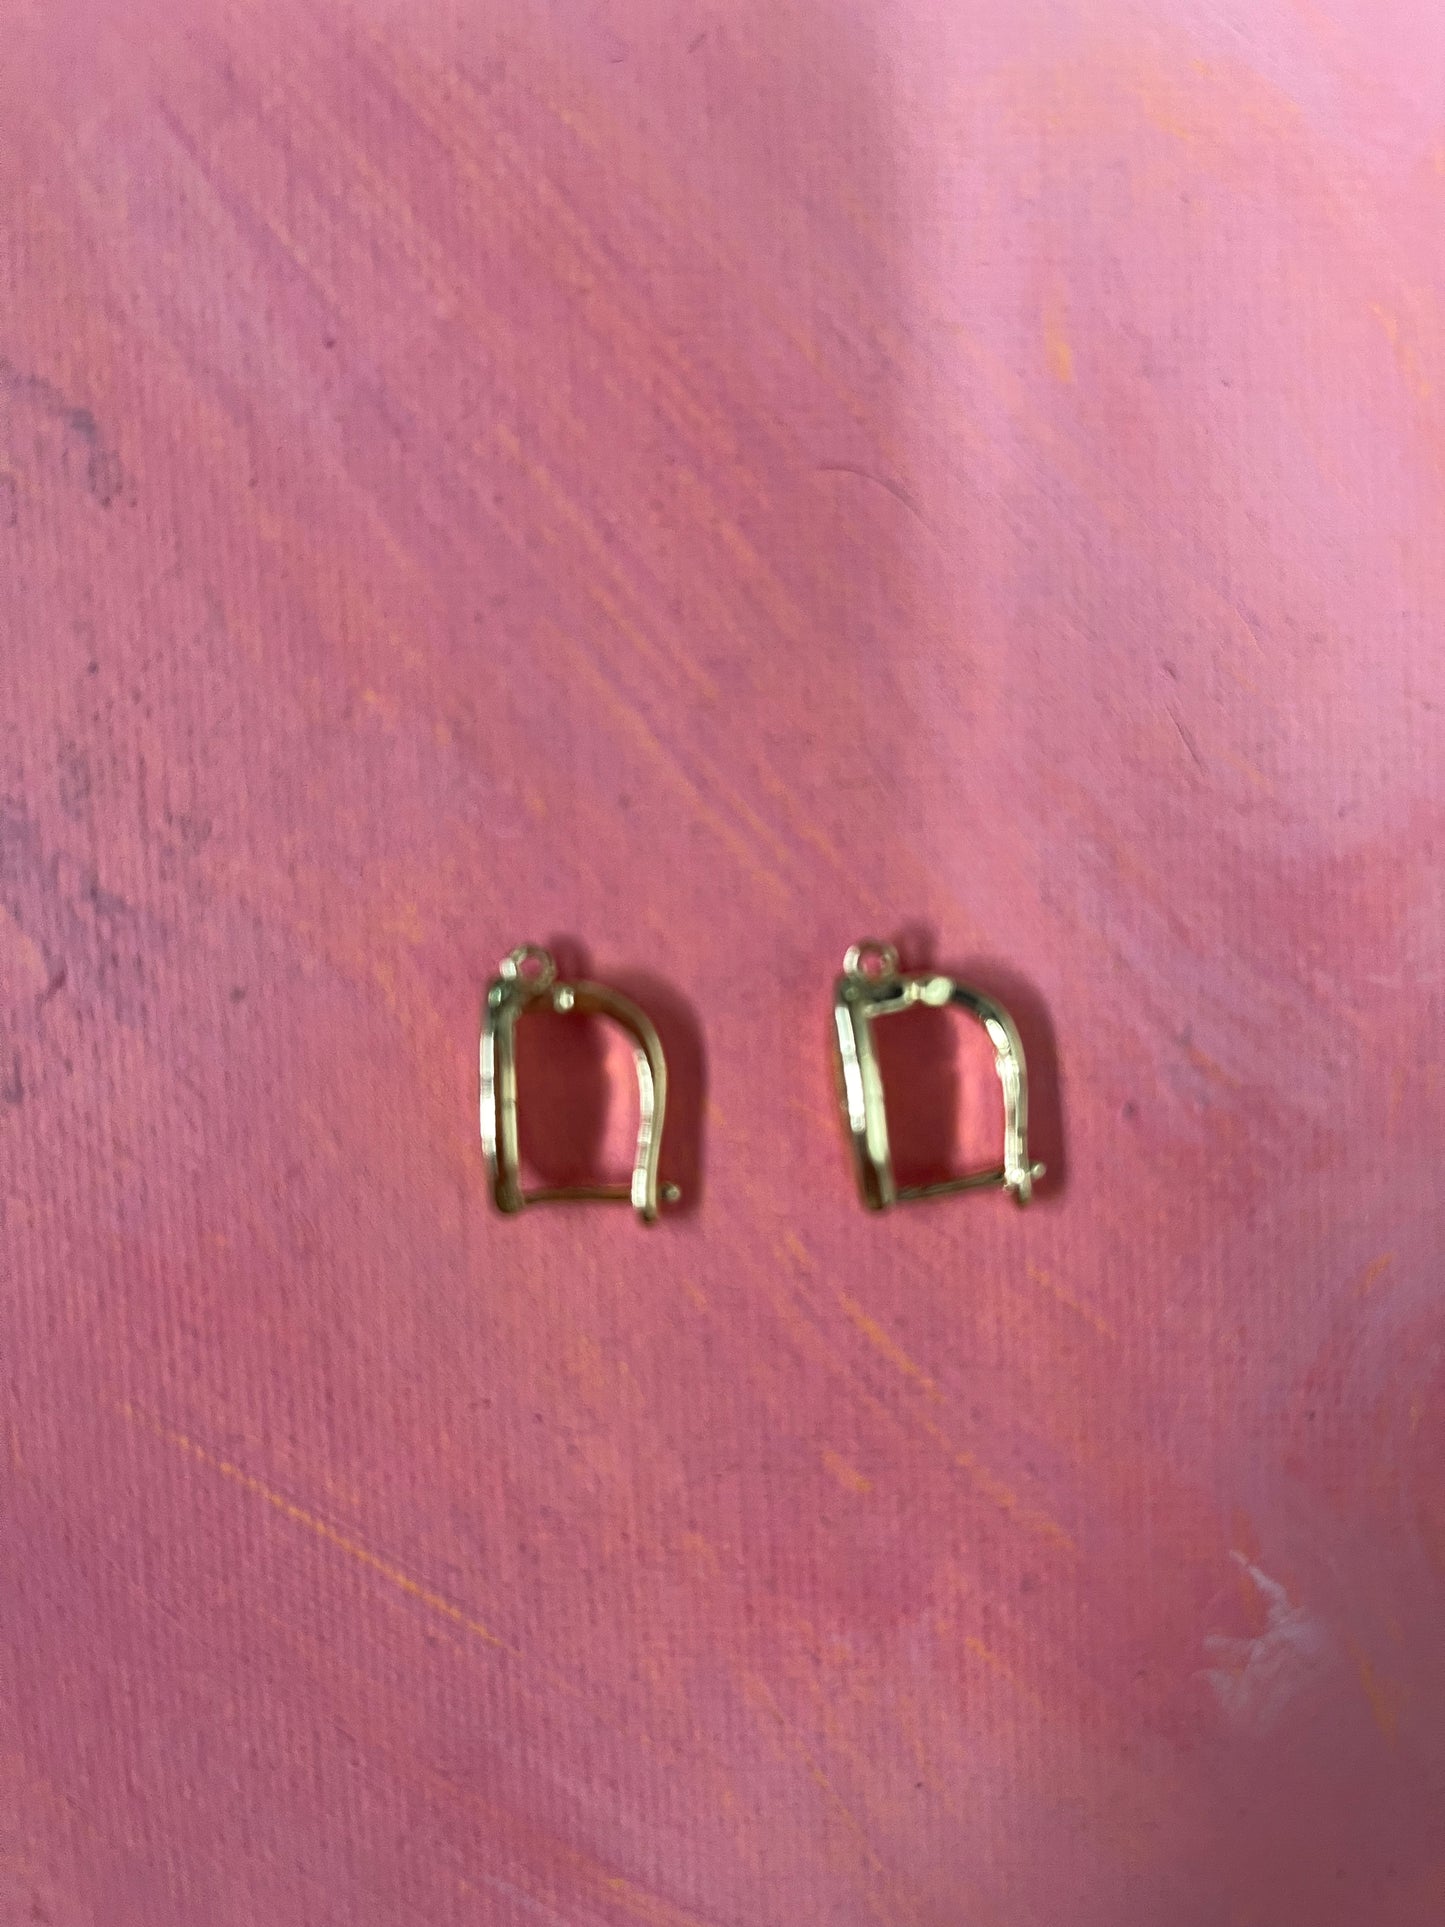 EARRING  LATCH BACK GOLD PLATE 18 KT 17.5MM 1 PAIR